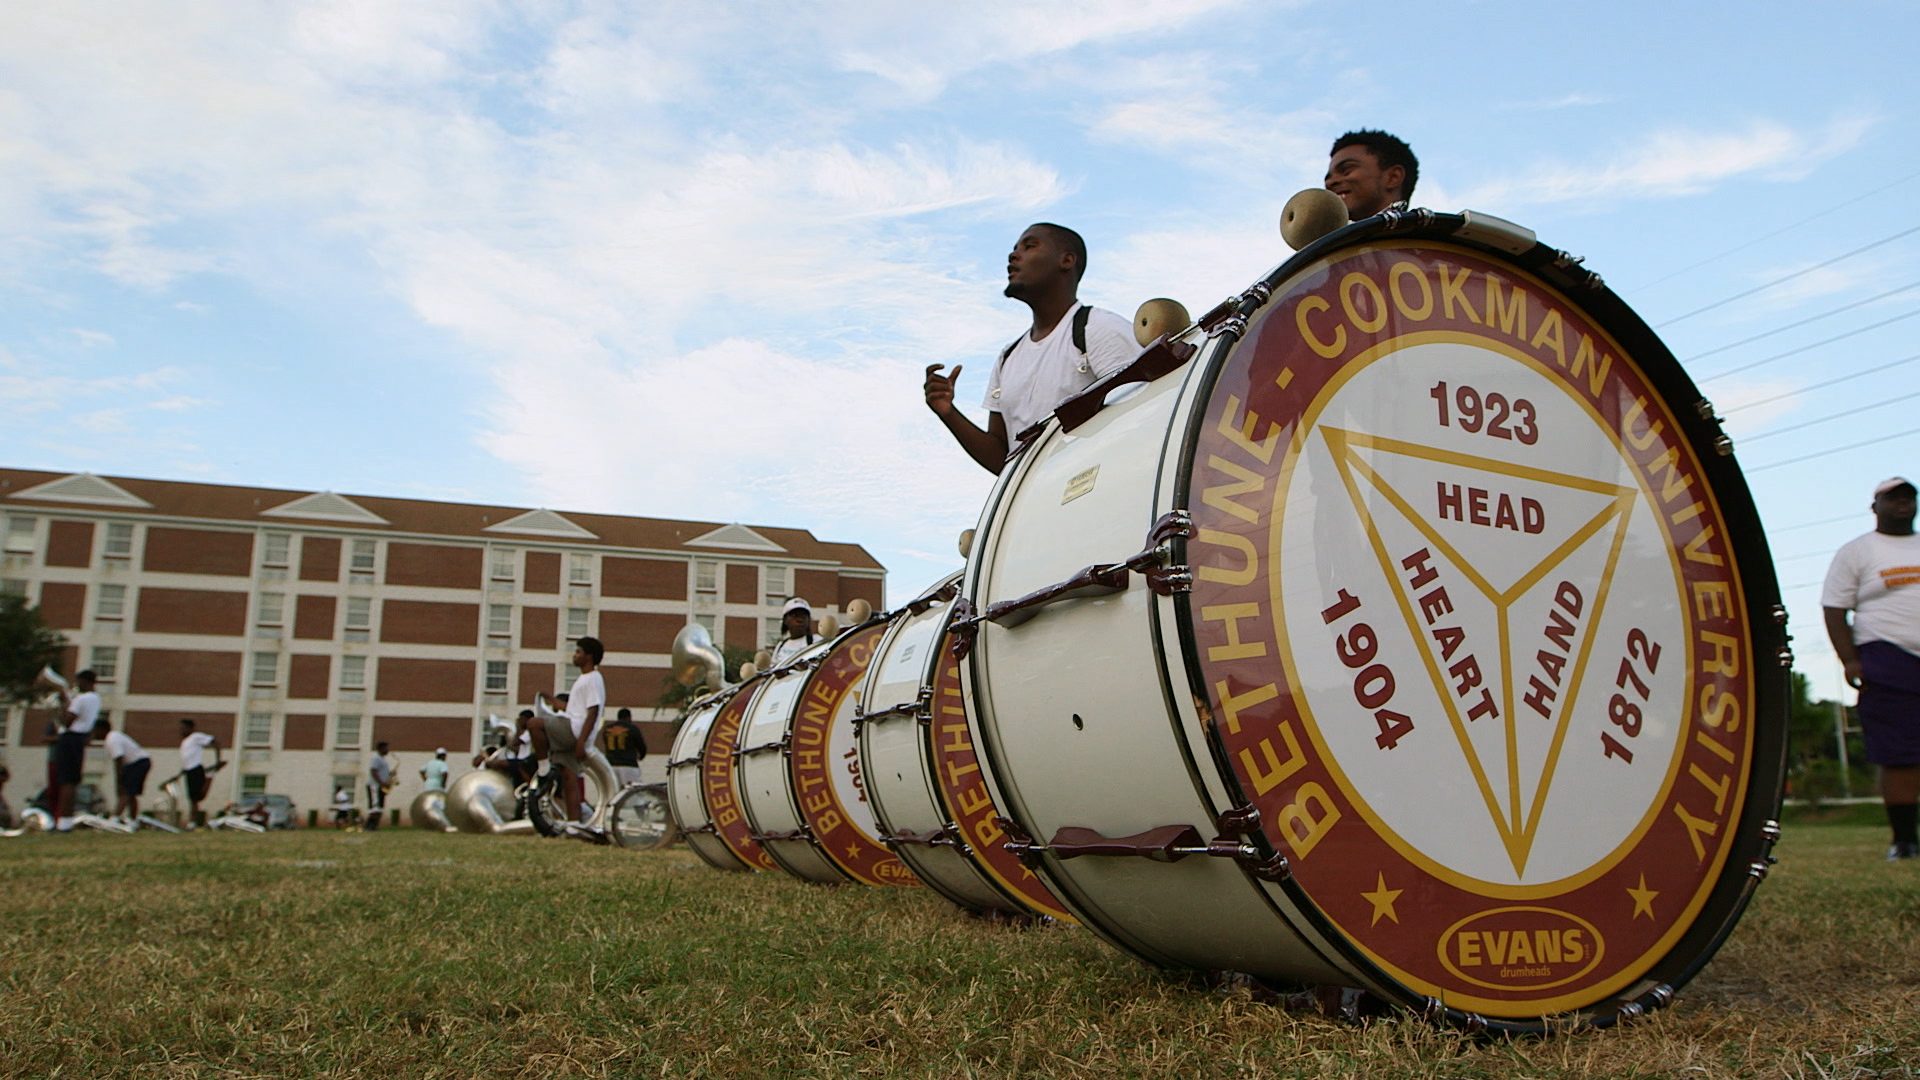 Band Practice, Rehearsal, Field, Formation, Before Queen City Battle Of The Bands, Bethune-Cookman University, BCU, Marching Wildcats, Marching Orders, Stage 13 Original, stage13network